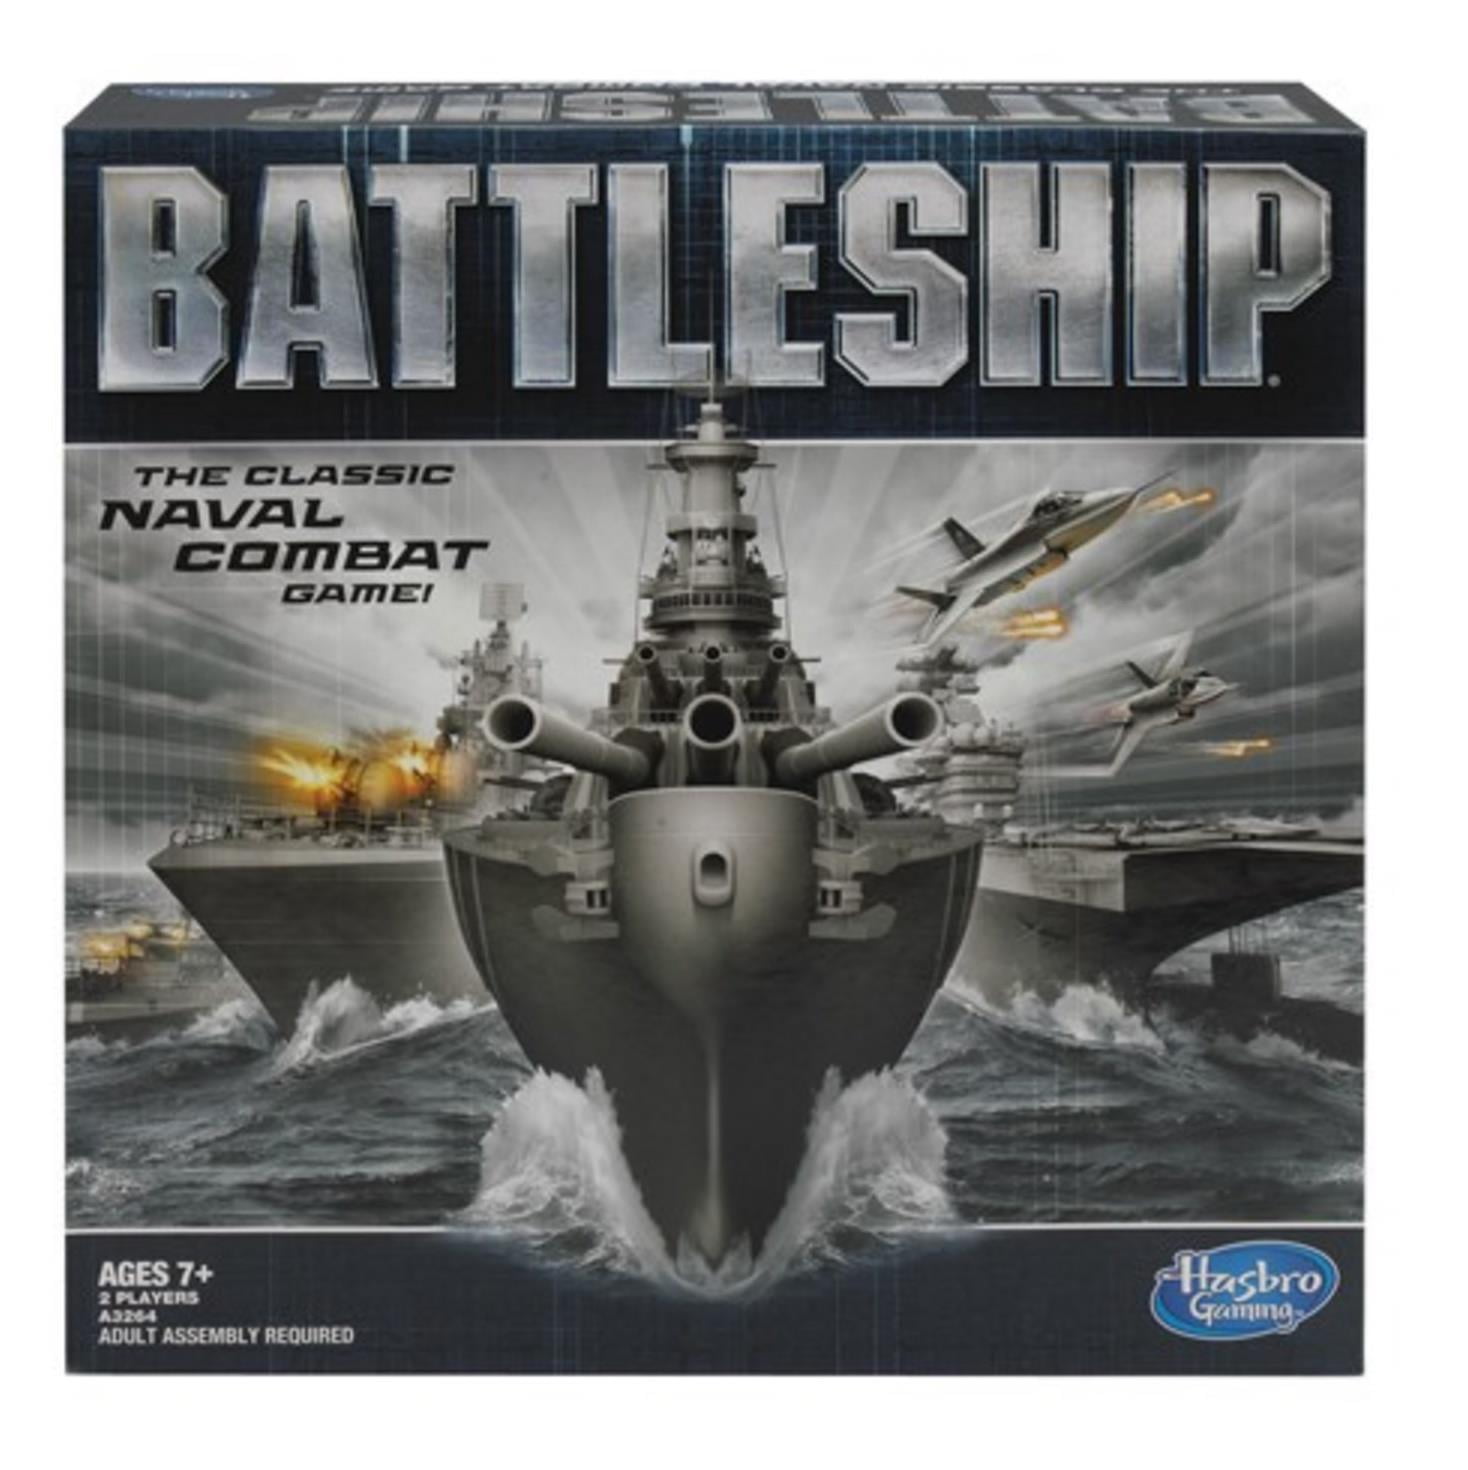 1998 Battleship Board Game Board Replacement Part Only 